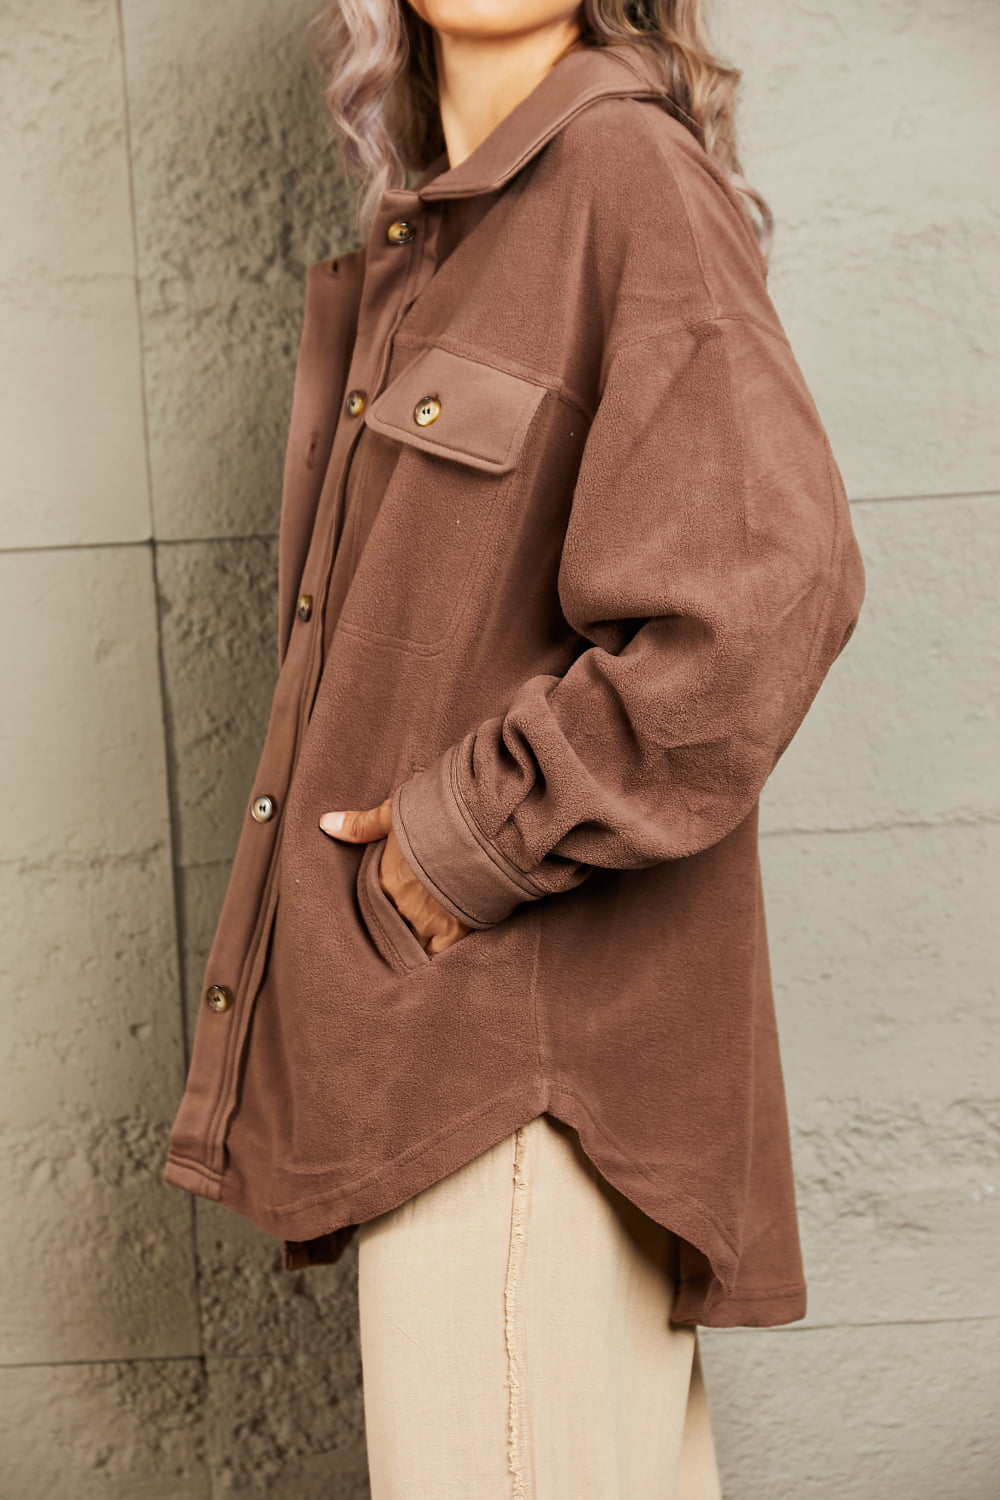 Brown Button Front Shacket